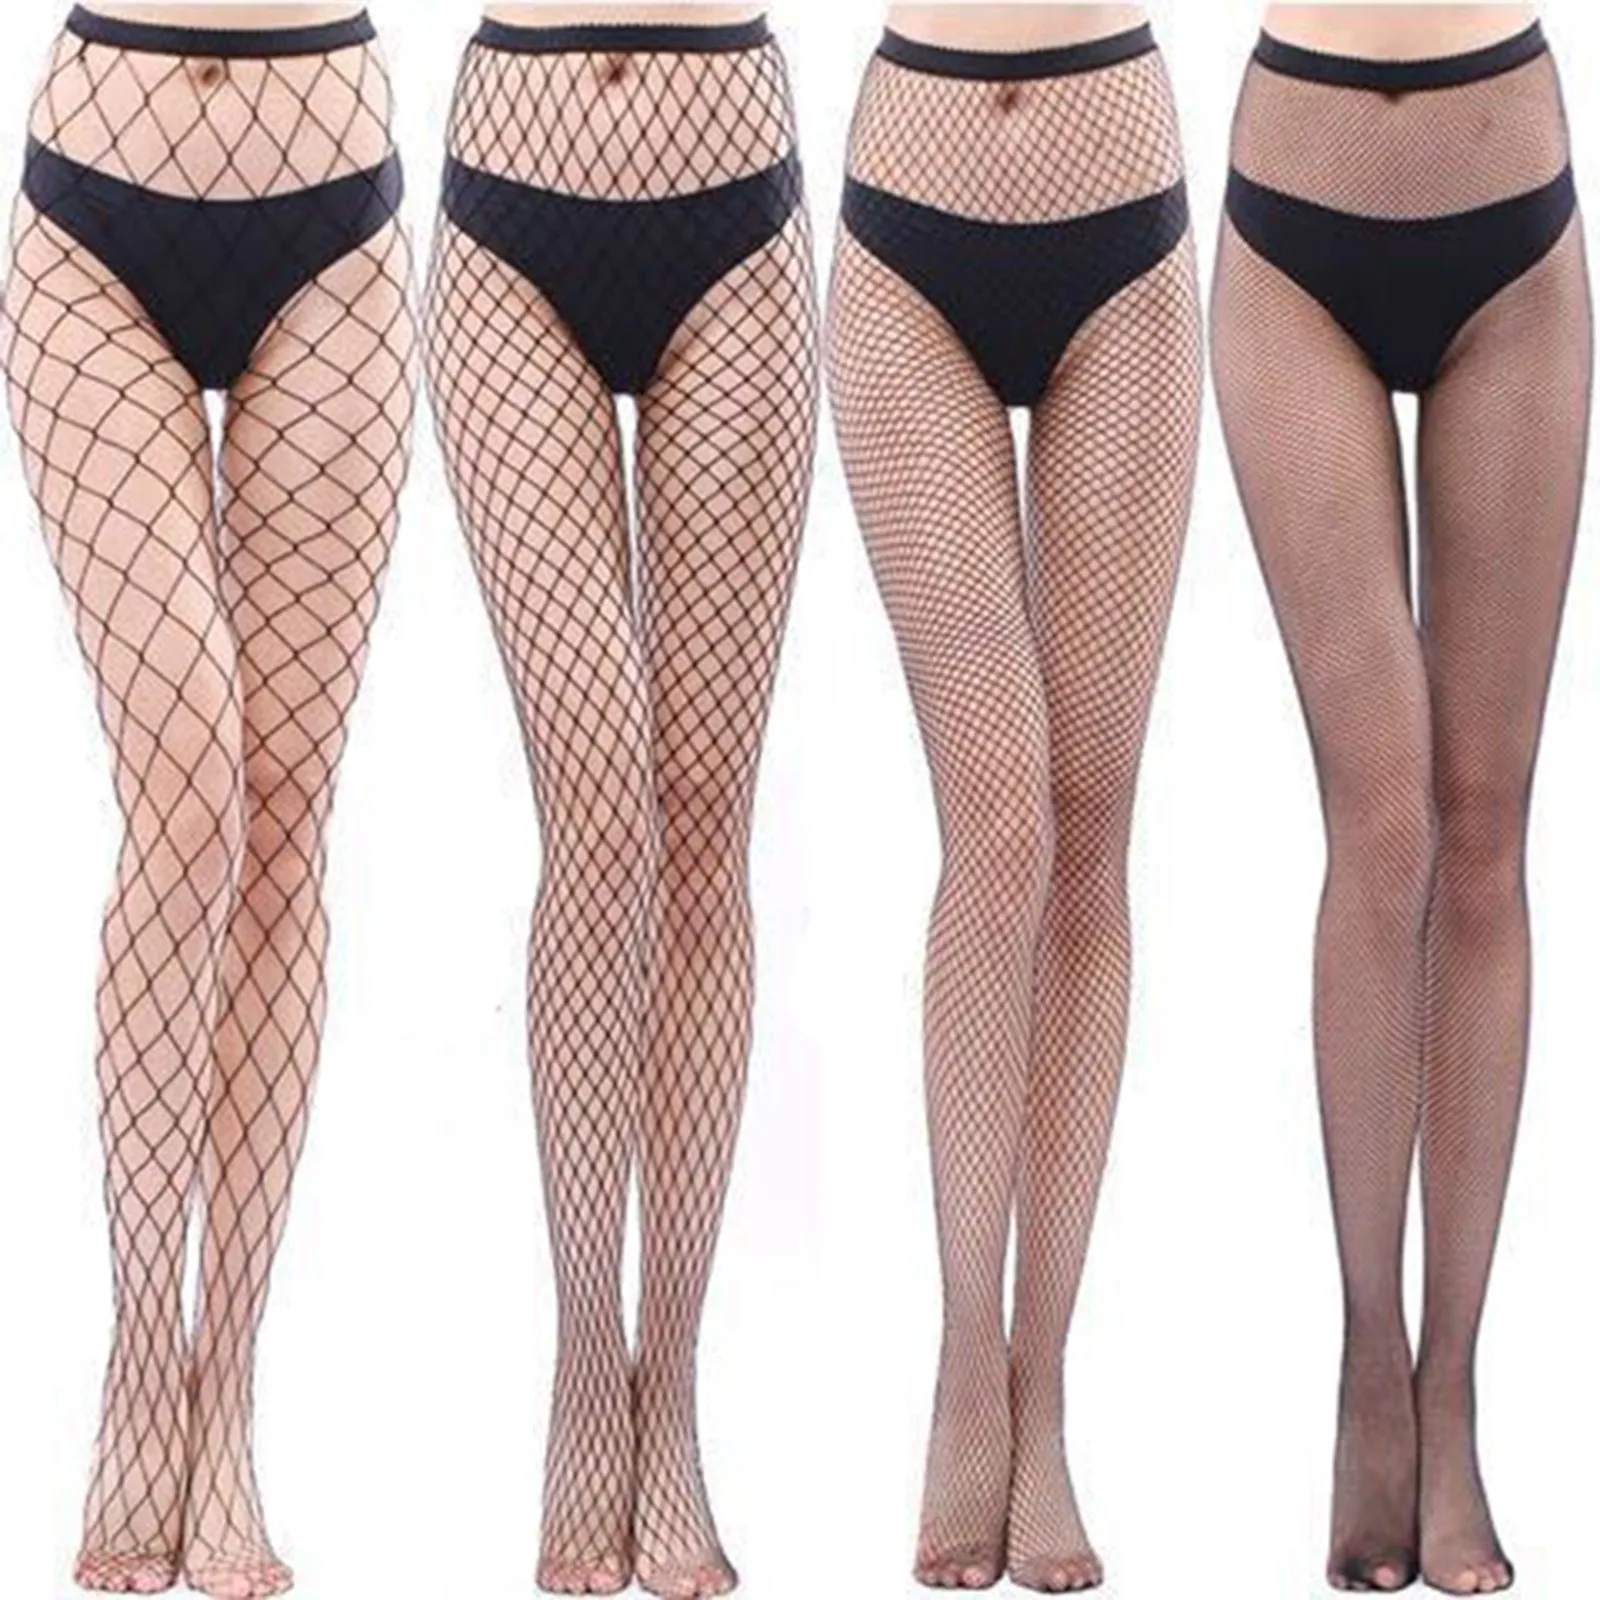 

Womens High Waist Fishnet Tights Suspenders Pantyhose Thigh High Stockings Black Porn Lingerie Intimate Underwear Sexy Costume